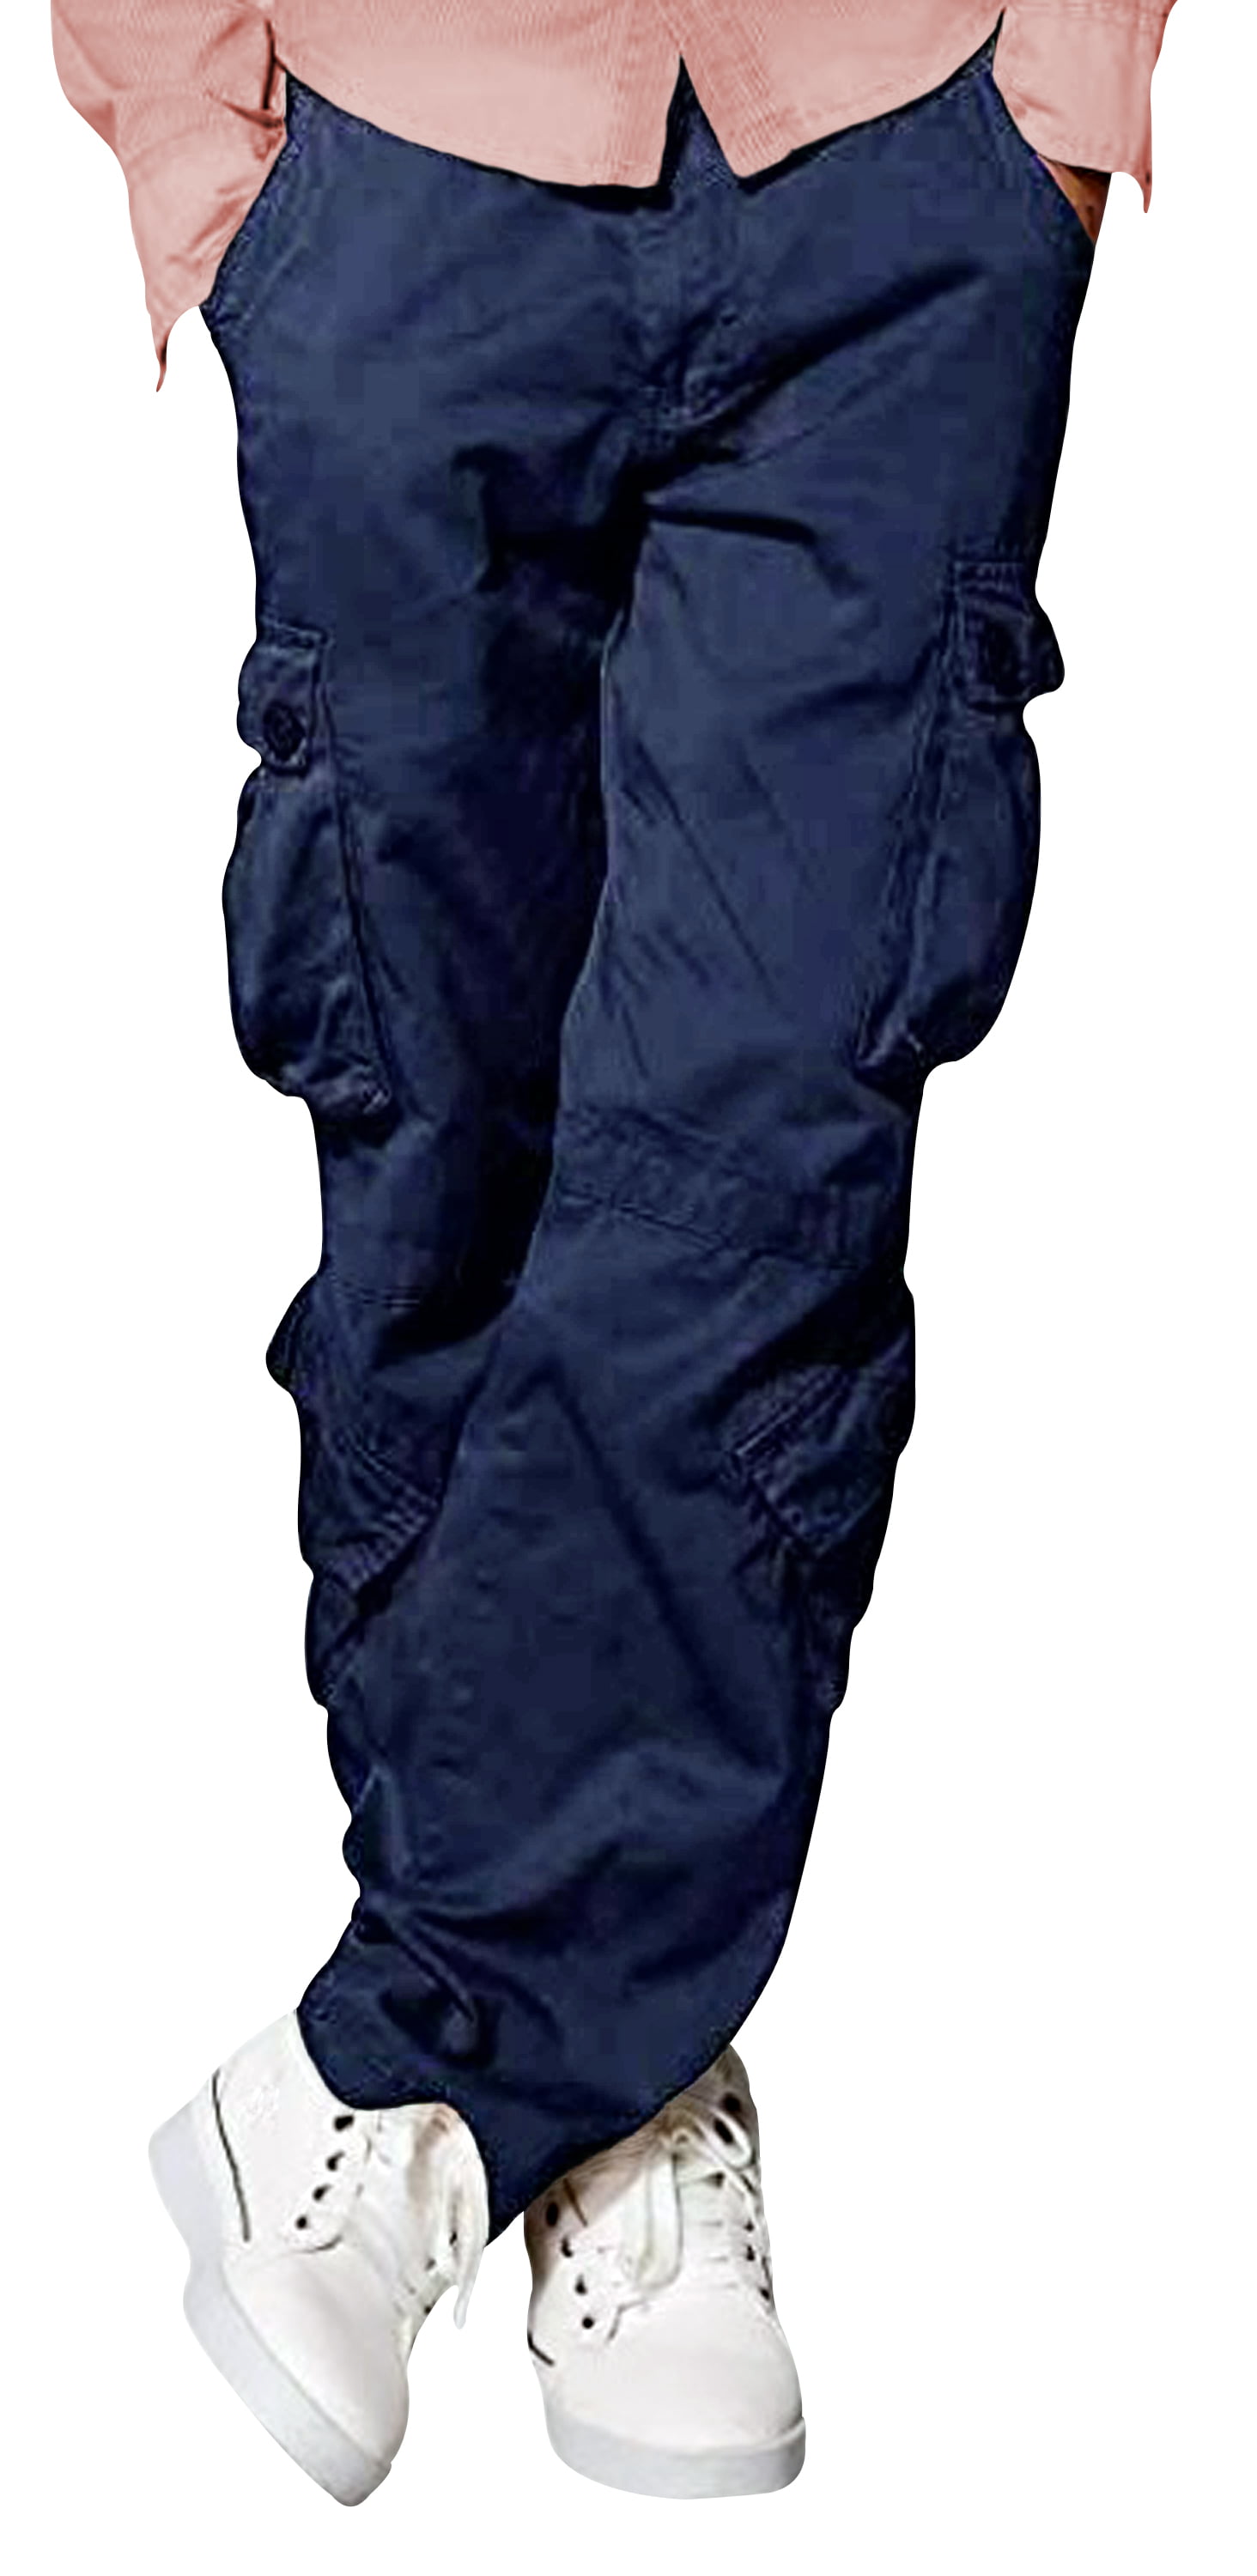 Mens Tactical Outdoor Hiking Pants Cargo Military Combat Comfy Work Trousers Hot 